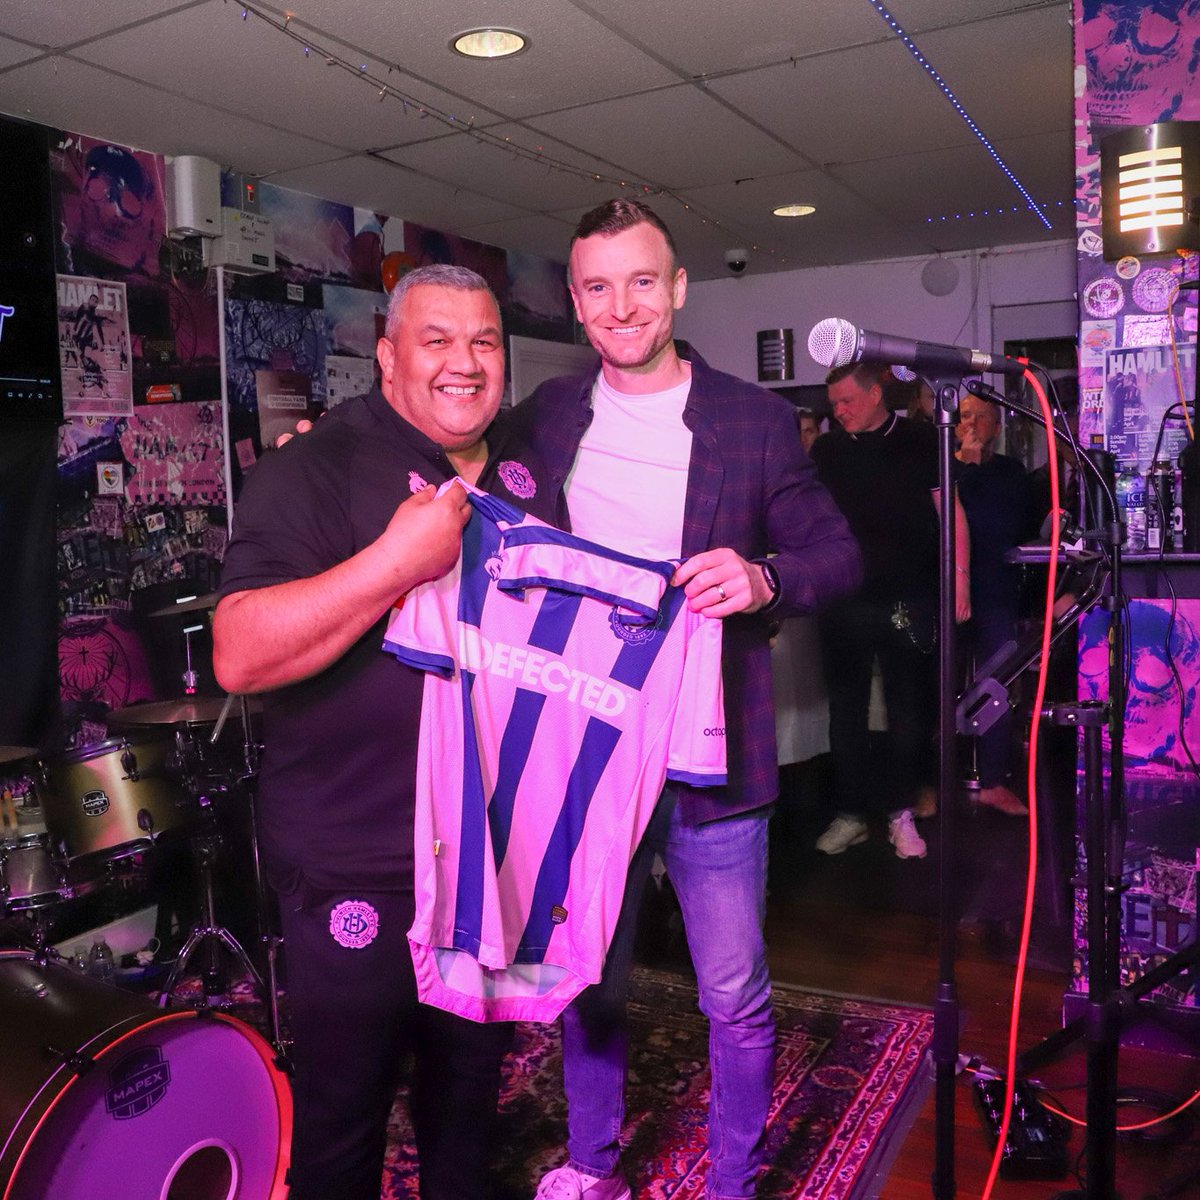 Following his retirement @Ricko707 was presented with one of his final kits signed by the playing squad, managers team and club staff. We look forward to seeing you joining the Rabble next season Ricko 😉 #DHFC 💖💙